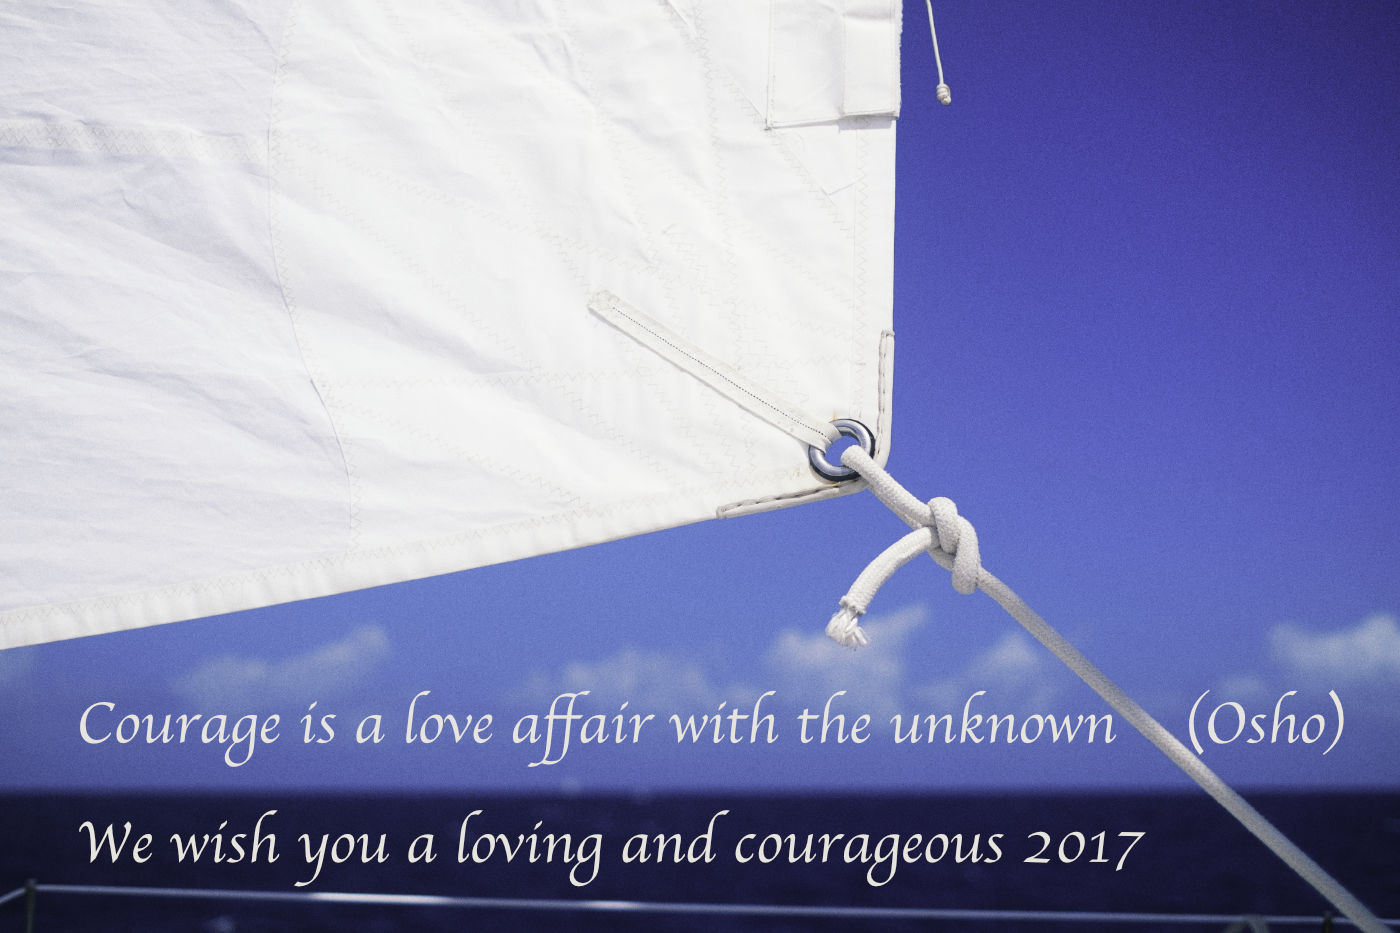 Courage is a love affair with the unknown (Osho) We wish you a loving and courageous 2017